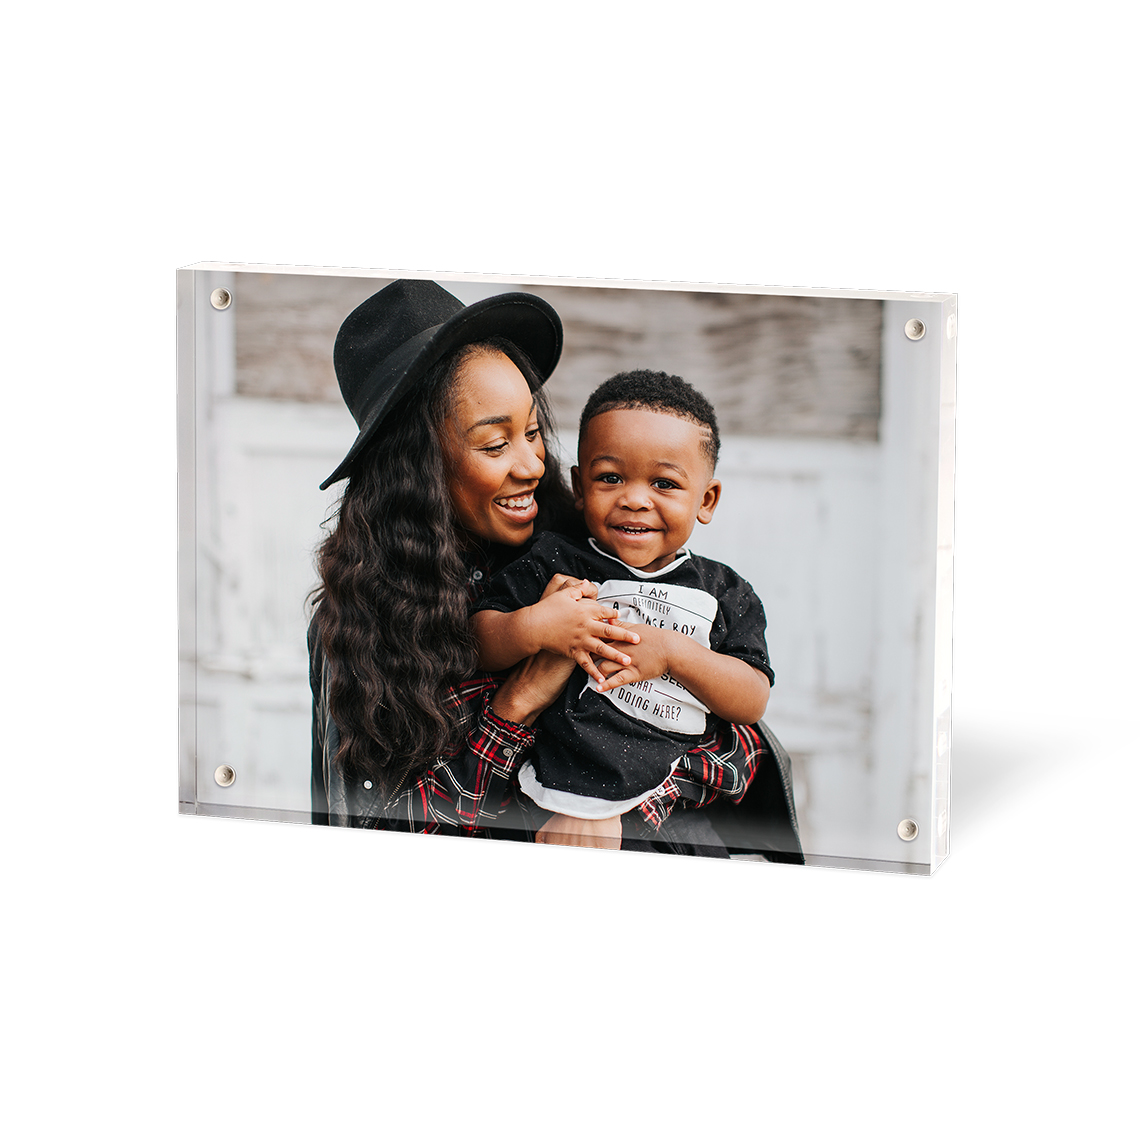 The Perfect Create-Your-Own Gift iCaseDesigner Personalised Acrylic Photo Block A6 4x6 Your Image Printed onto Solid Acrylic